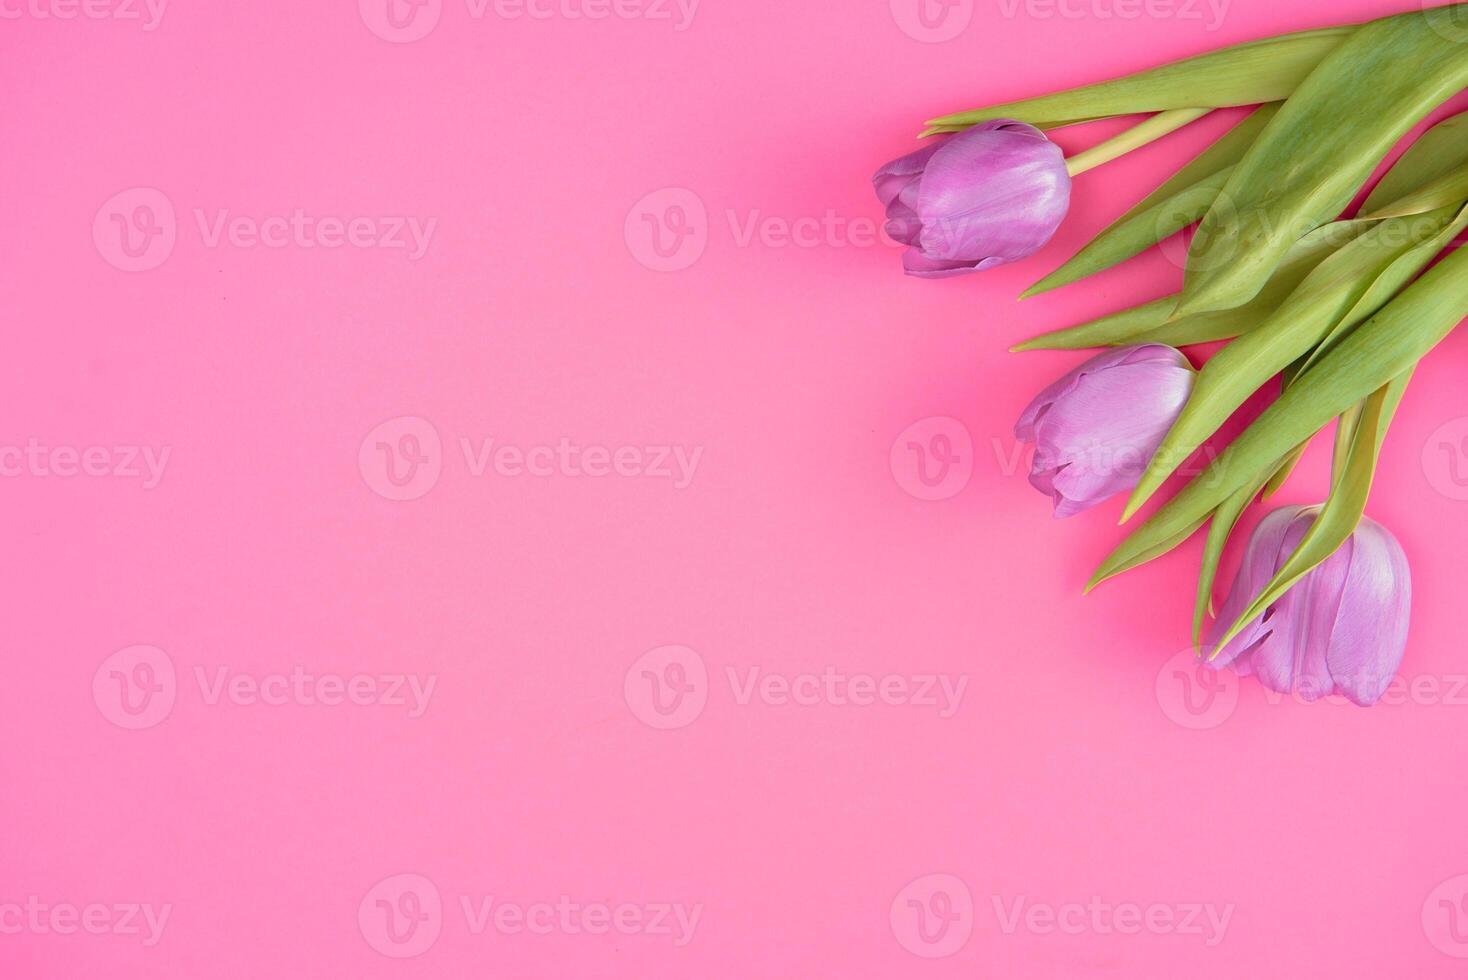 Pink tulips on the pink background. Flat lay, top view. Valentines background. Horizontal,, toned photo